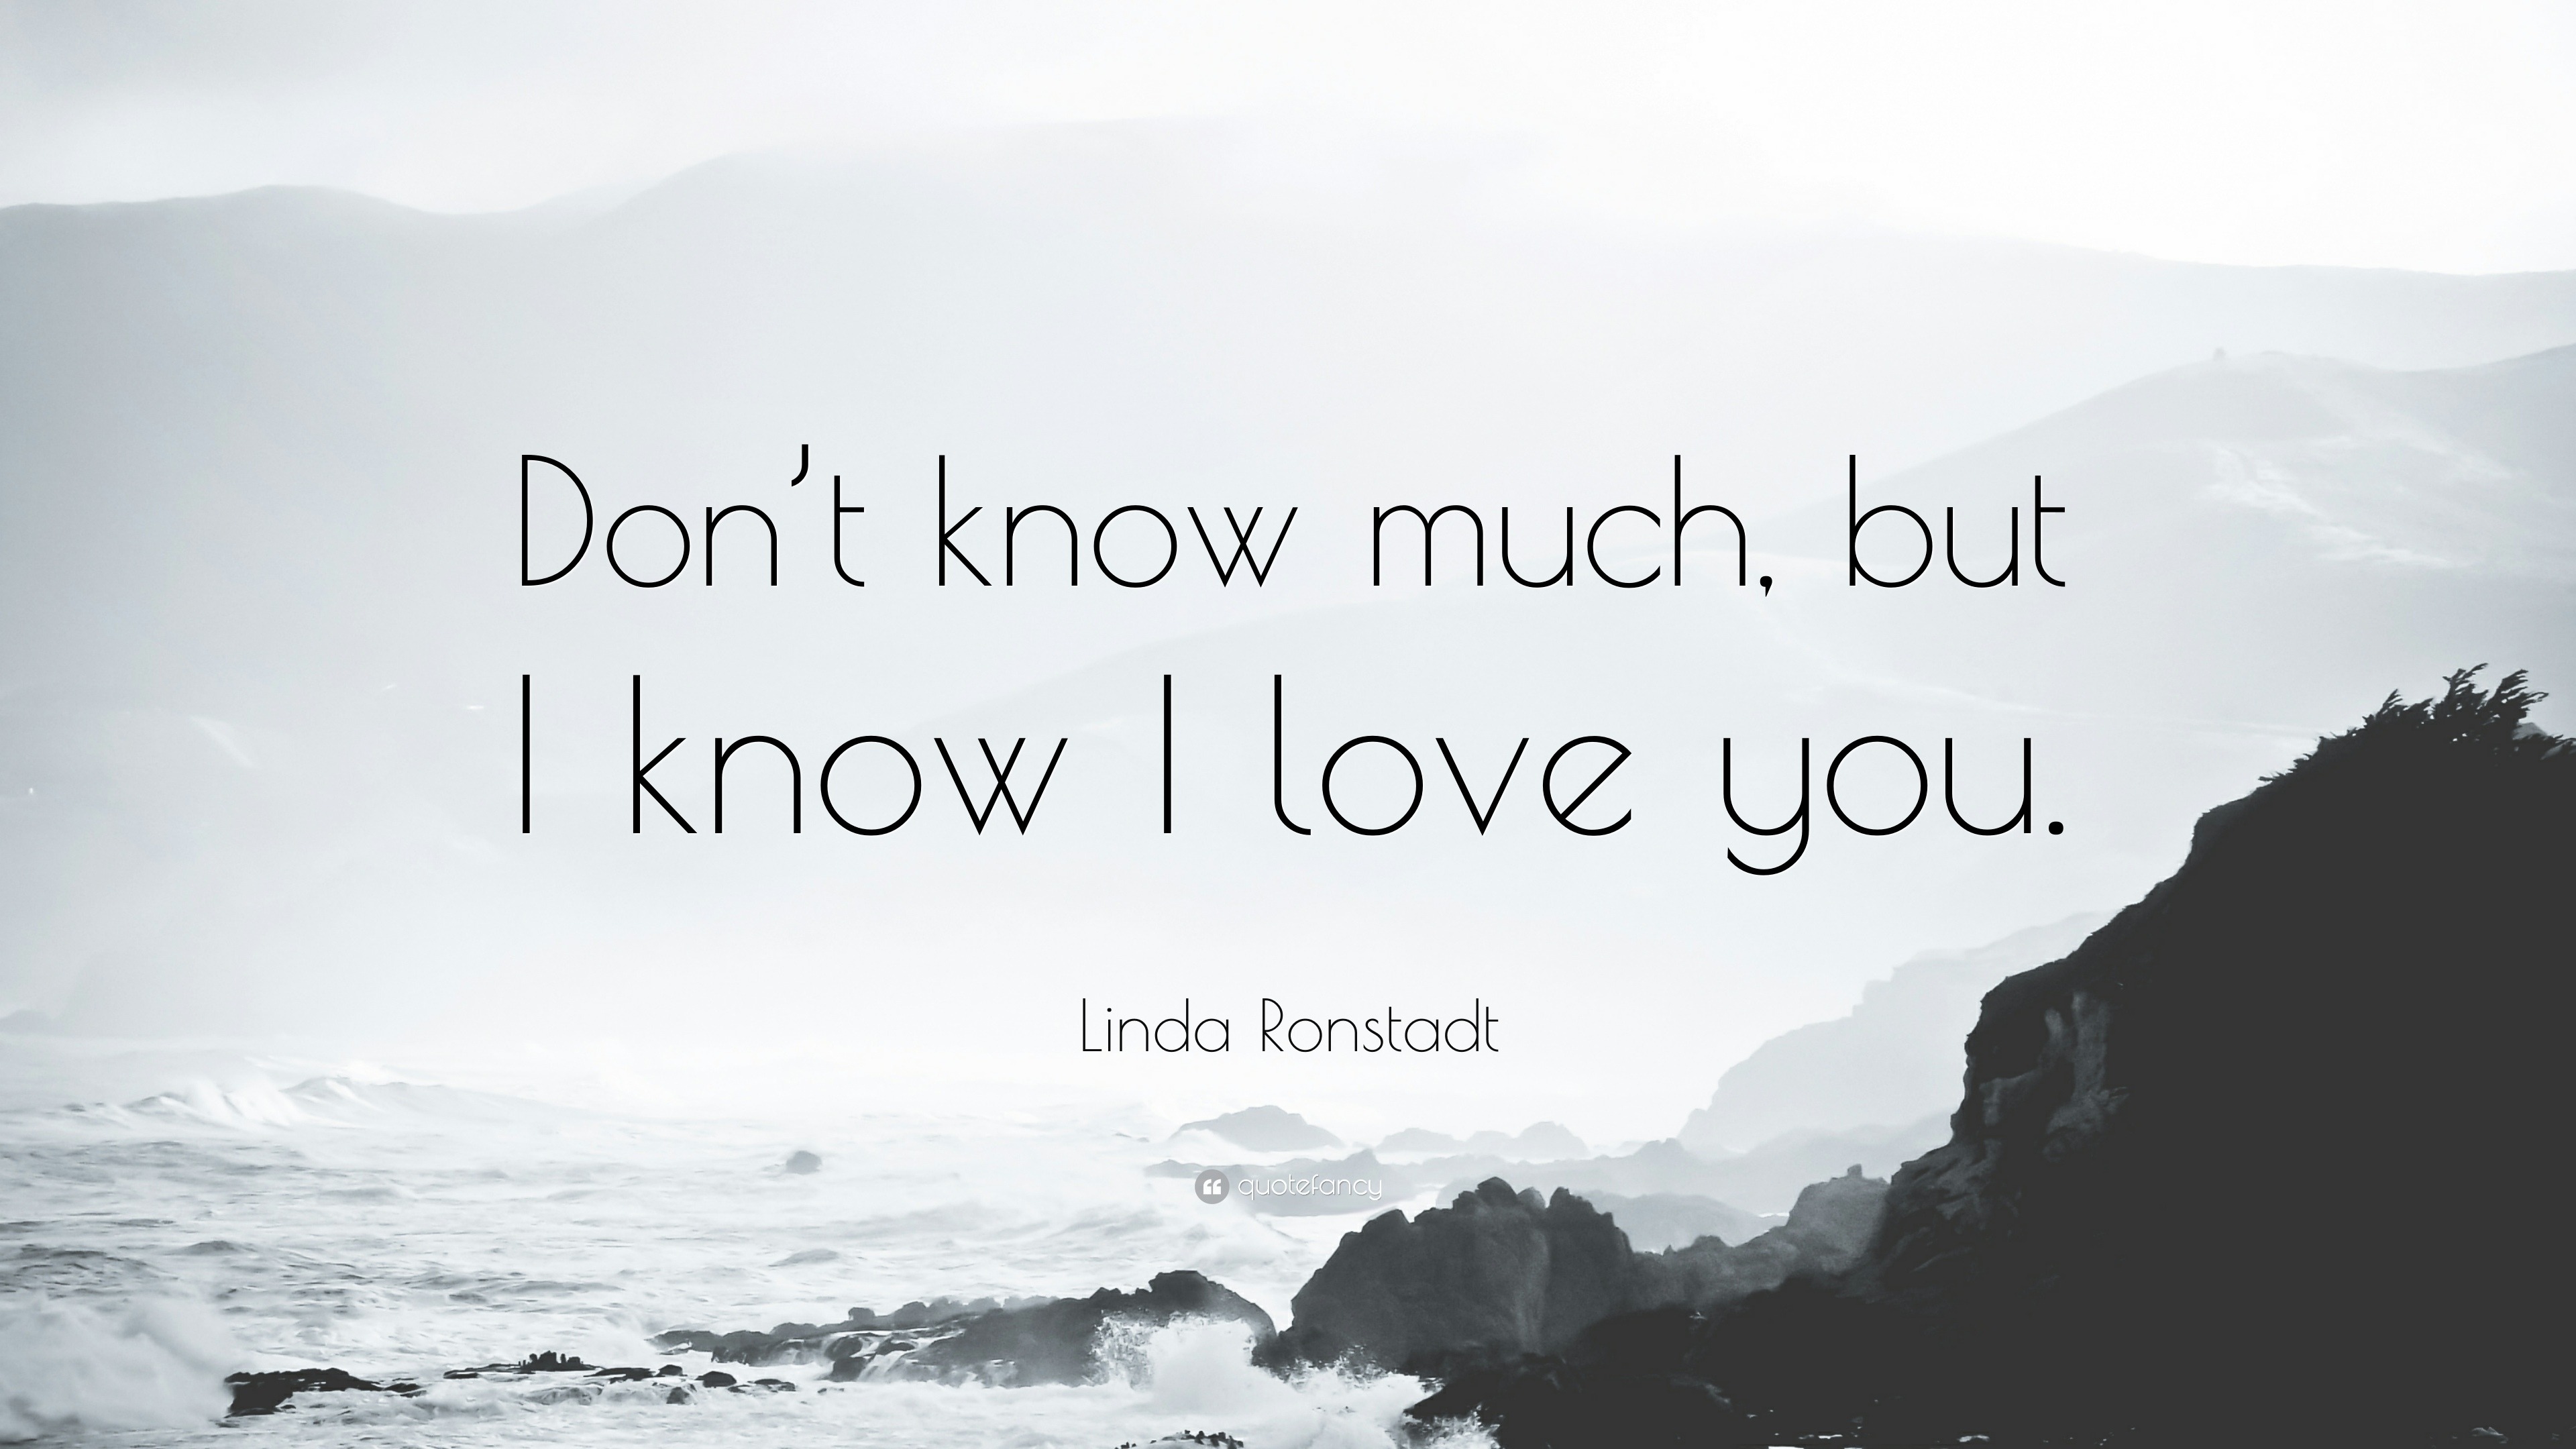 Linda Ronstadt Quote “Don t know much but I know I love